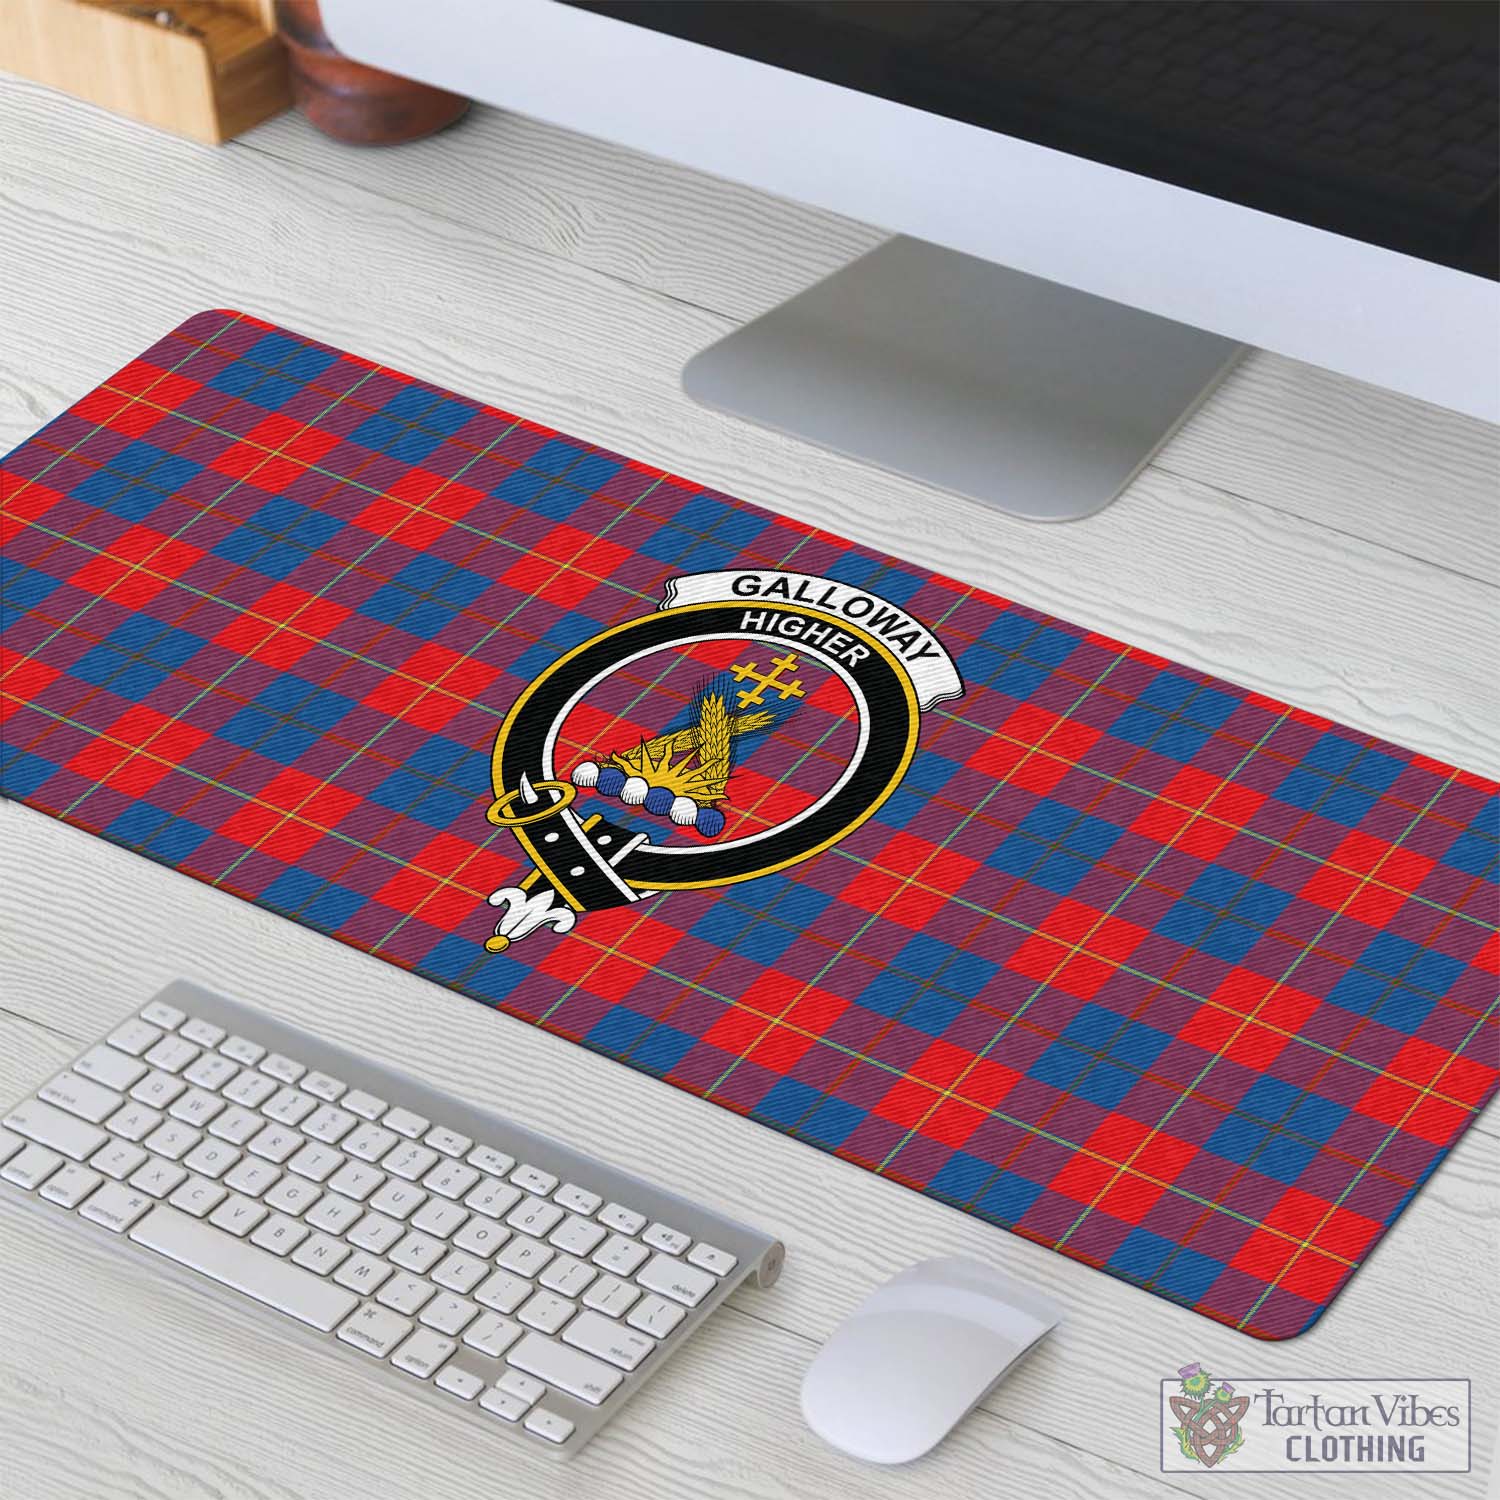 Tartan Vibes Clothing Galloway Red Tartan Mouse Pad with Family Crest